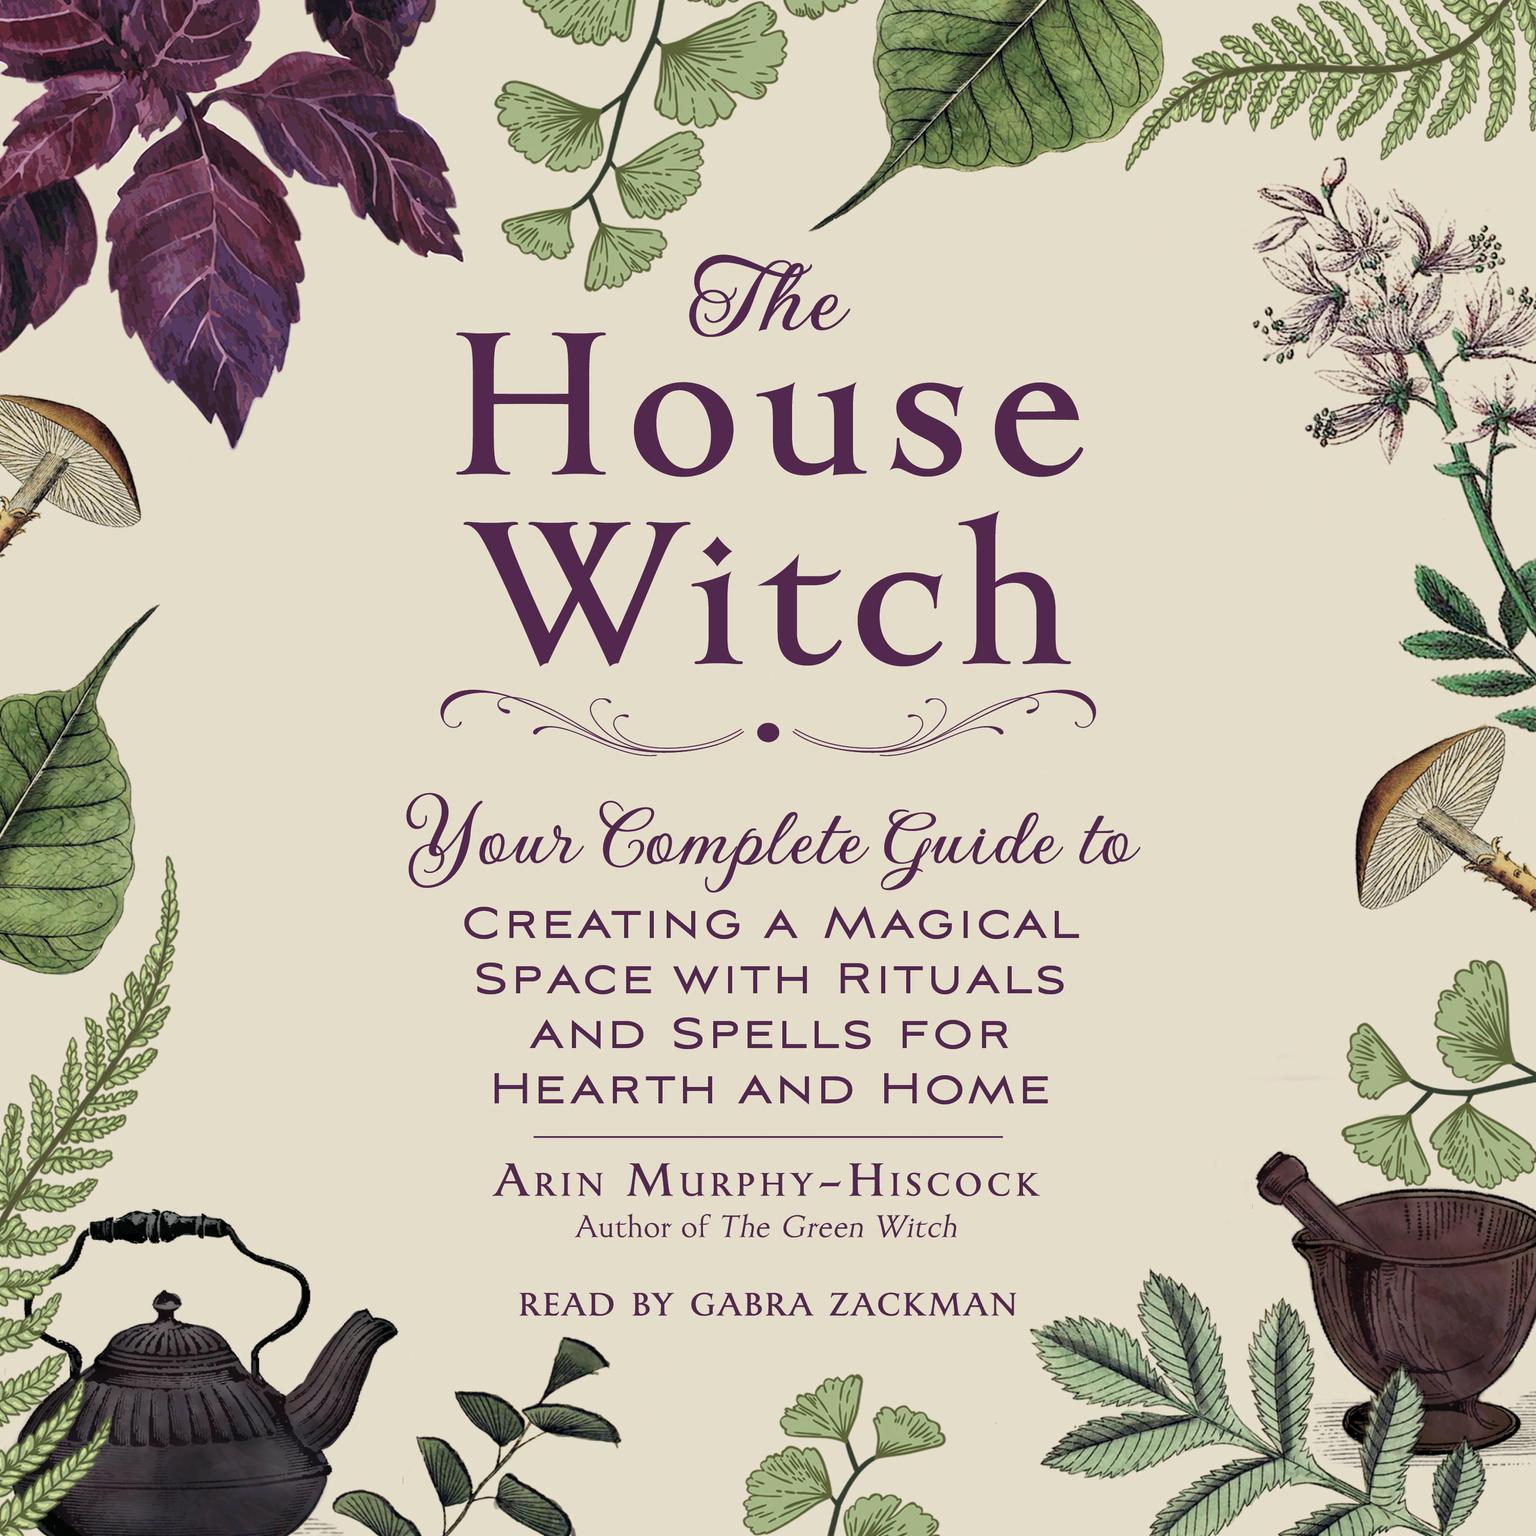 The House Witch: Your Complete Guide to Creating a Magical Space with Rituals and Spells for Hearth and Home Audiobook, by Arin Murphy-Hiscock